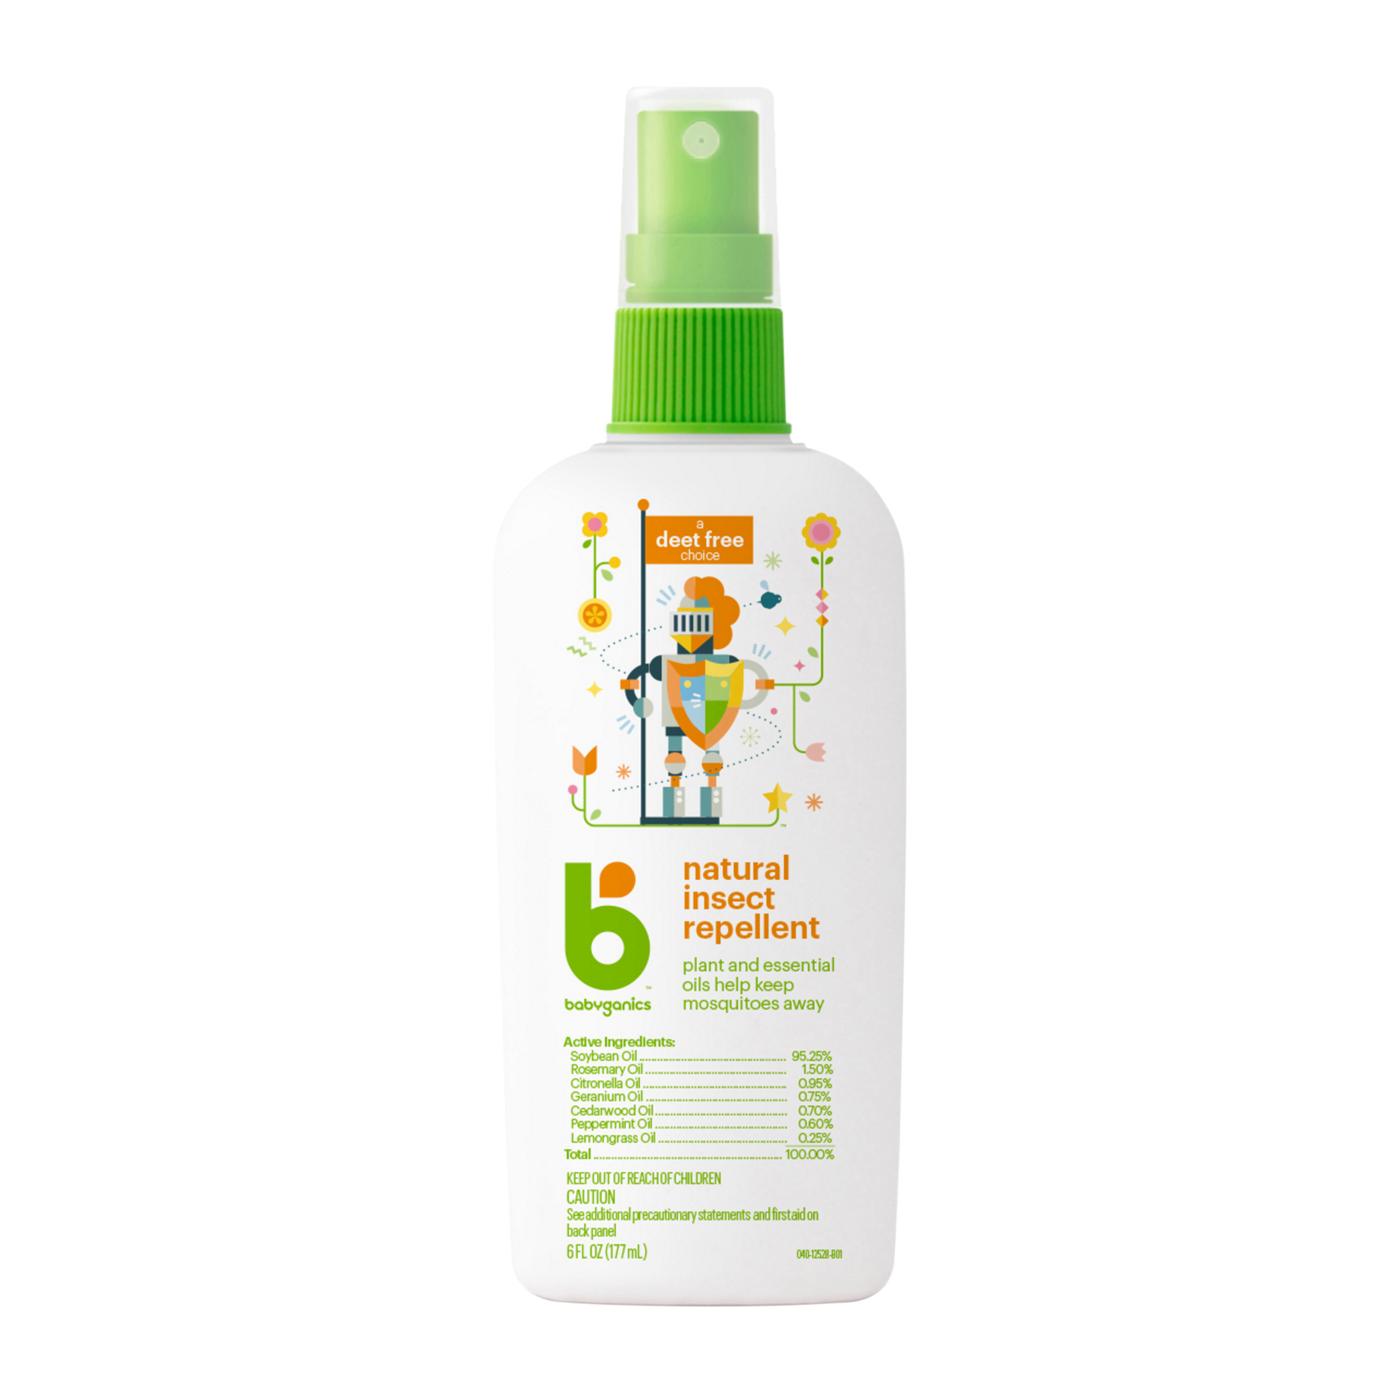 Babyganics Natural Insect Repellent; image 1 of 2